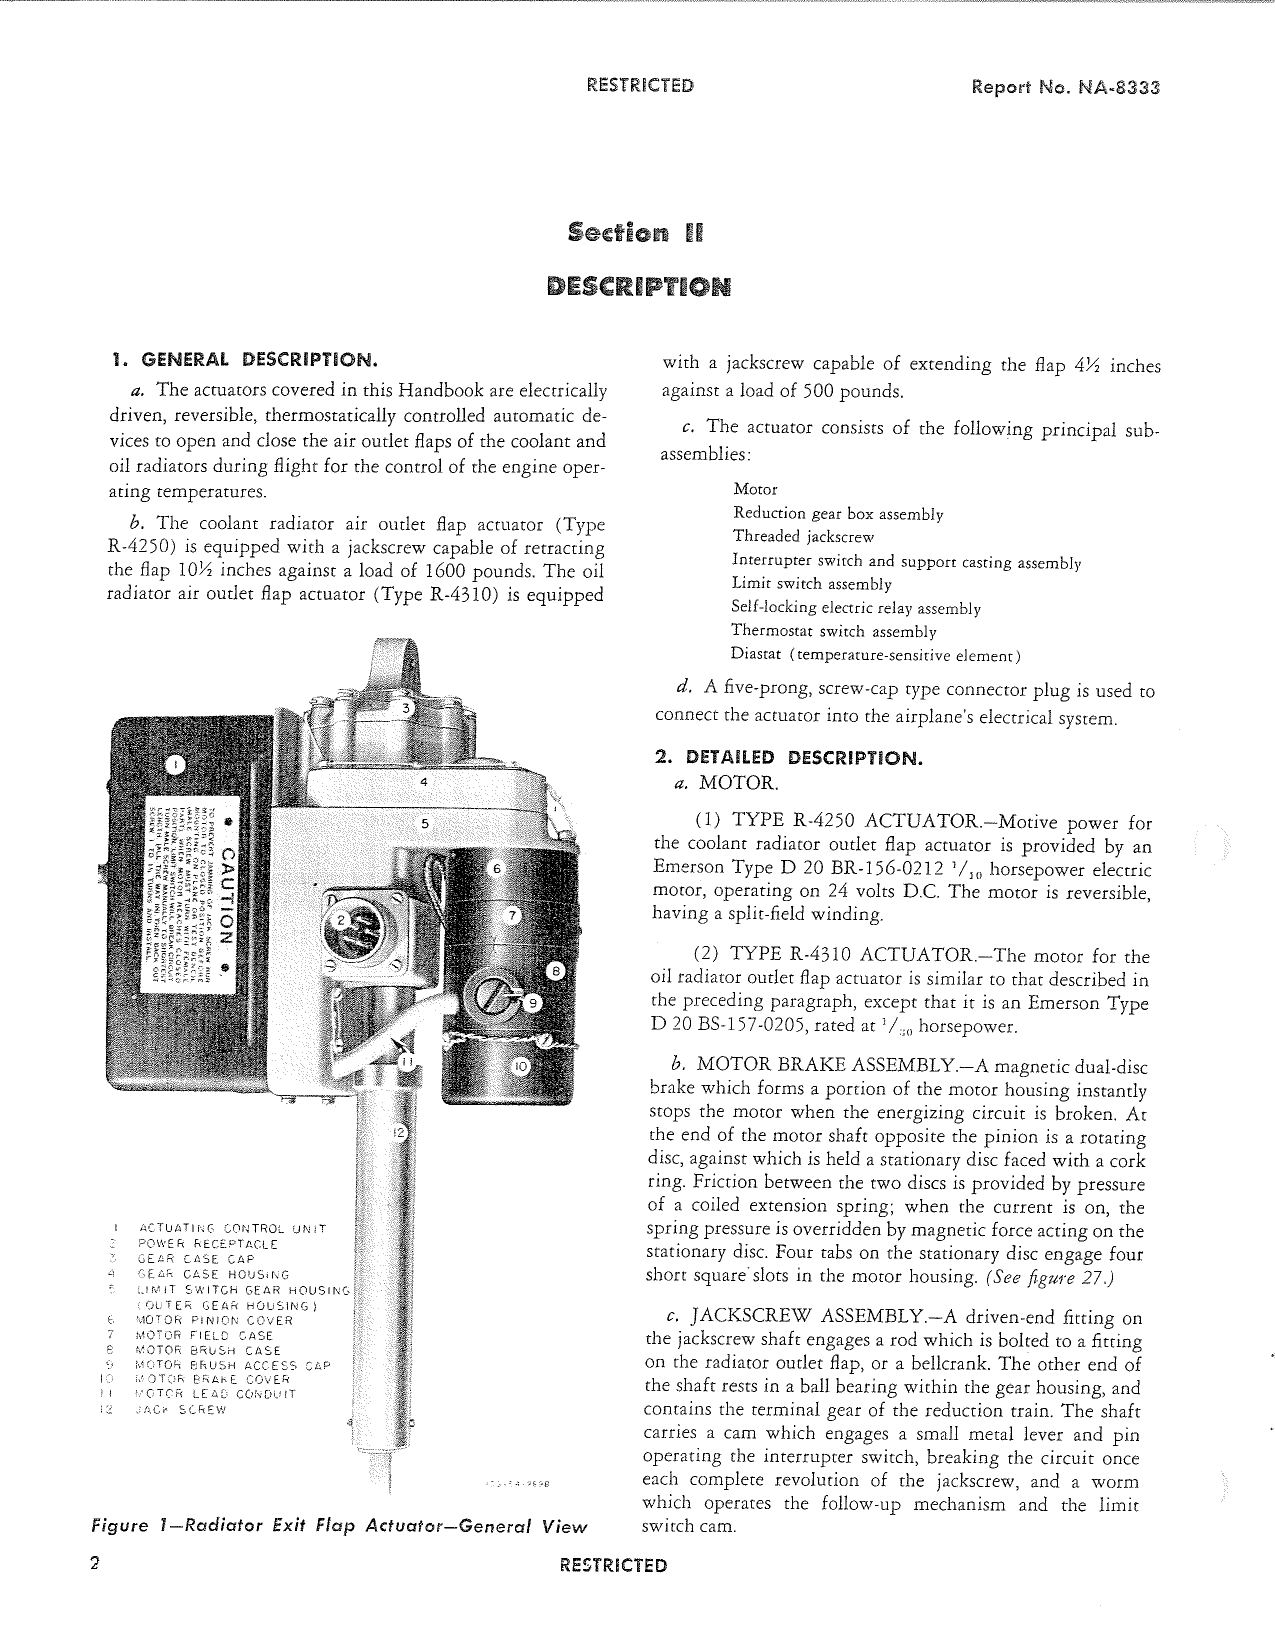 Sample page 5 from AirCorps Library document: Service Manual for Robertshaw Actuators Models R-4310 and R-4250